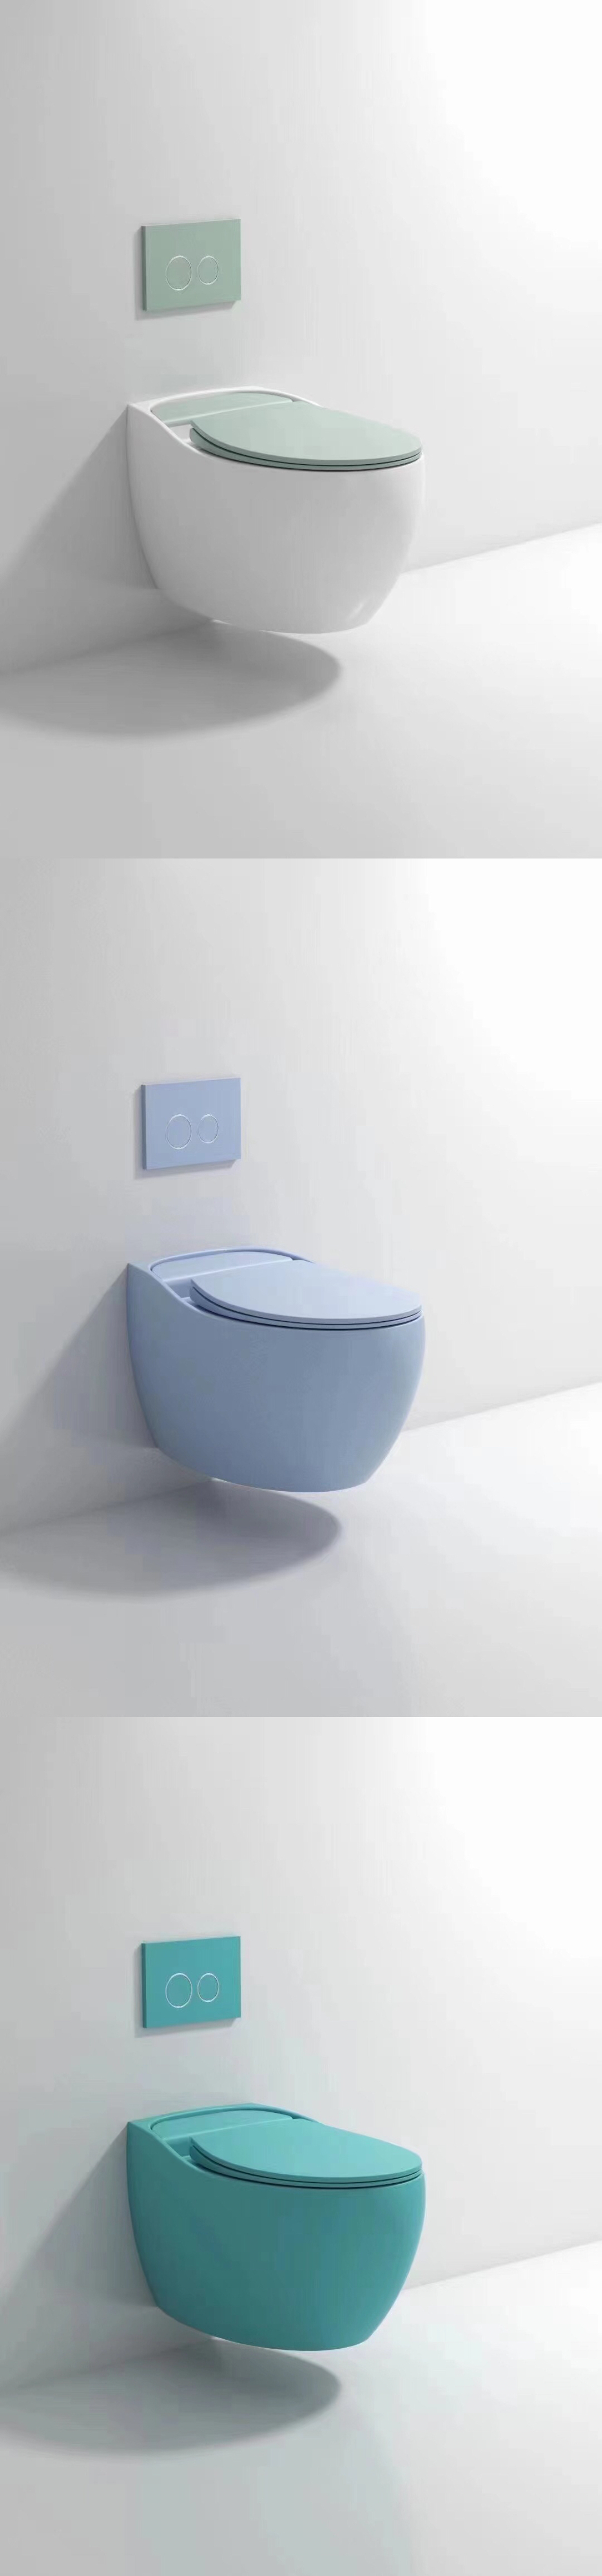 Smooth Glazed Wall Hung Toilet Hot Selling Beautiful Toilet with Cistern Concealed Wear Resistance